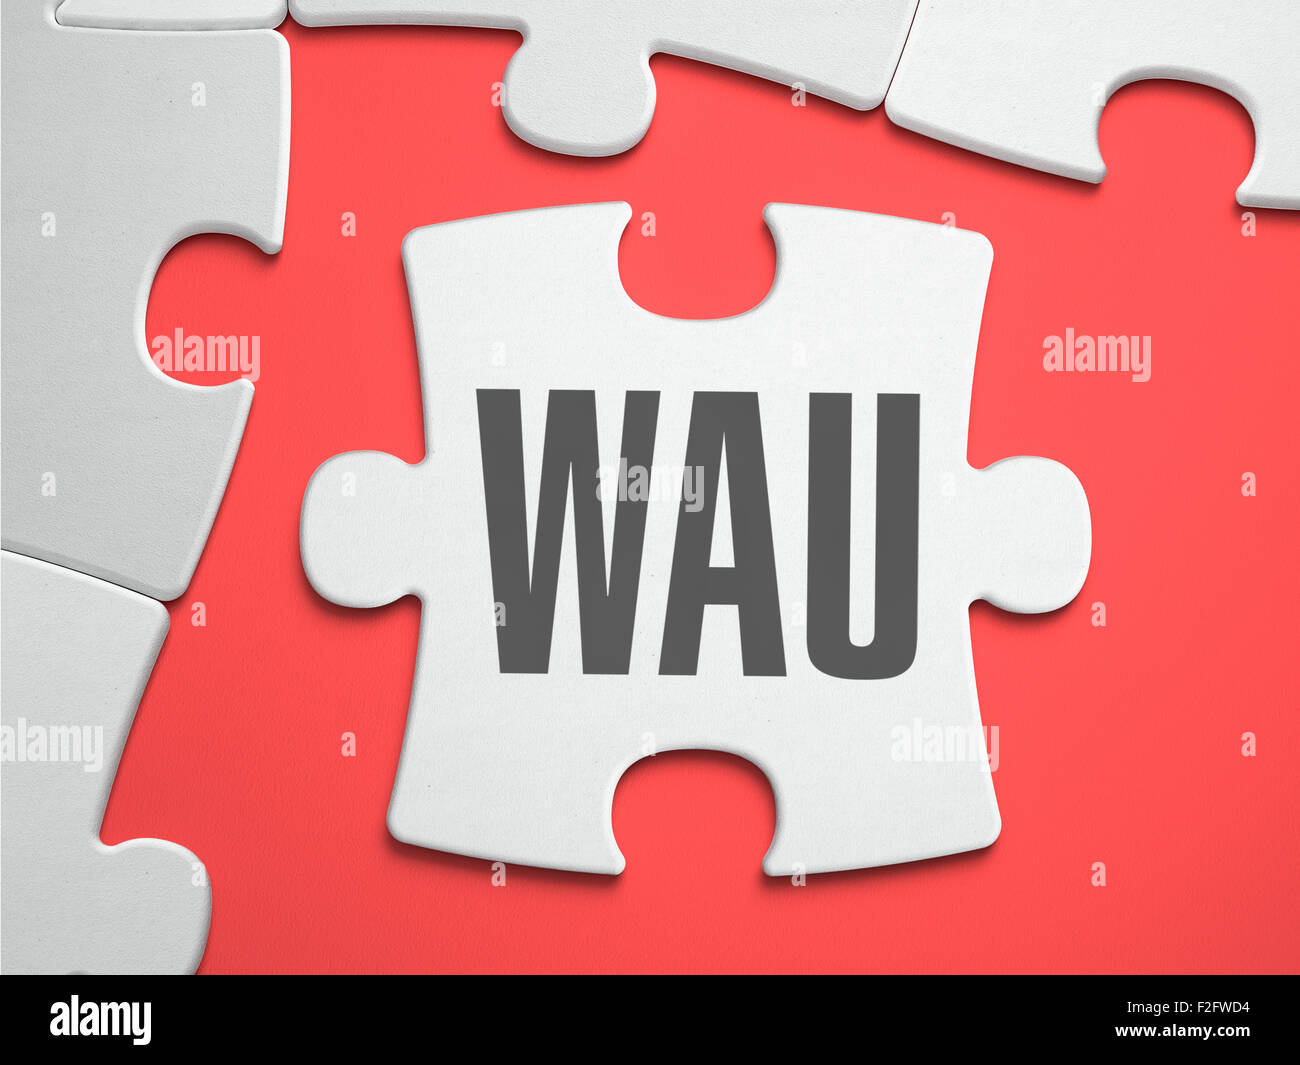 WAU - Weekly Active Users - Text on Puzzle on the Place of Missing Pieces. Scarlett Background. Close-up. 3d Illustration. Stock Photo